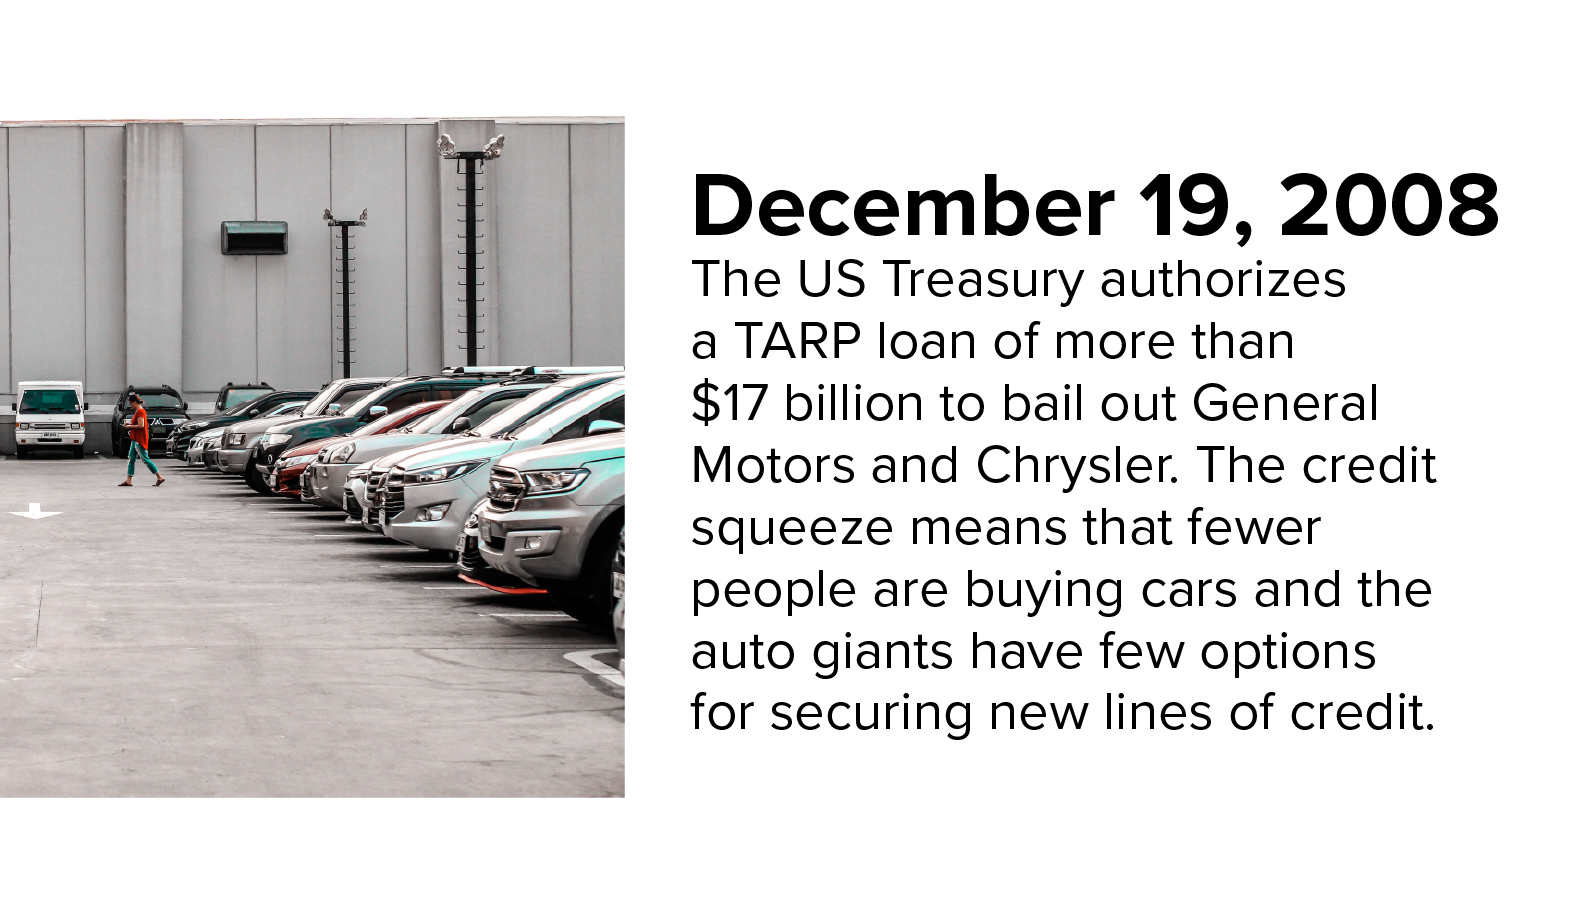 Photo of auto lot. US Treasury bails out General Motors and Chrysler in December of 2008.